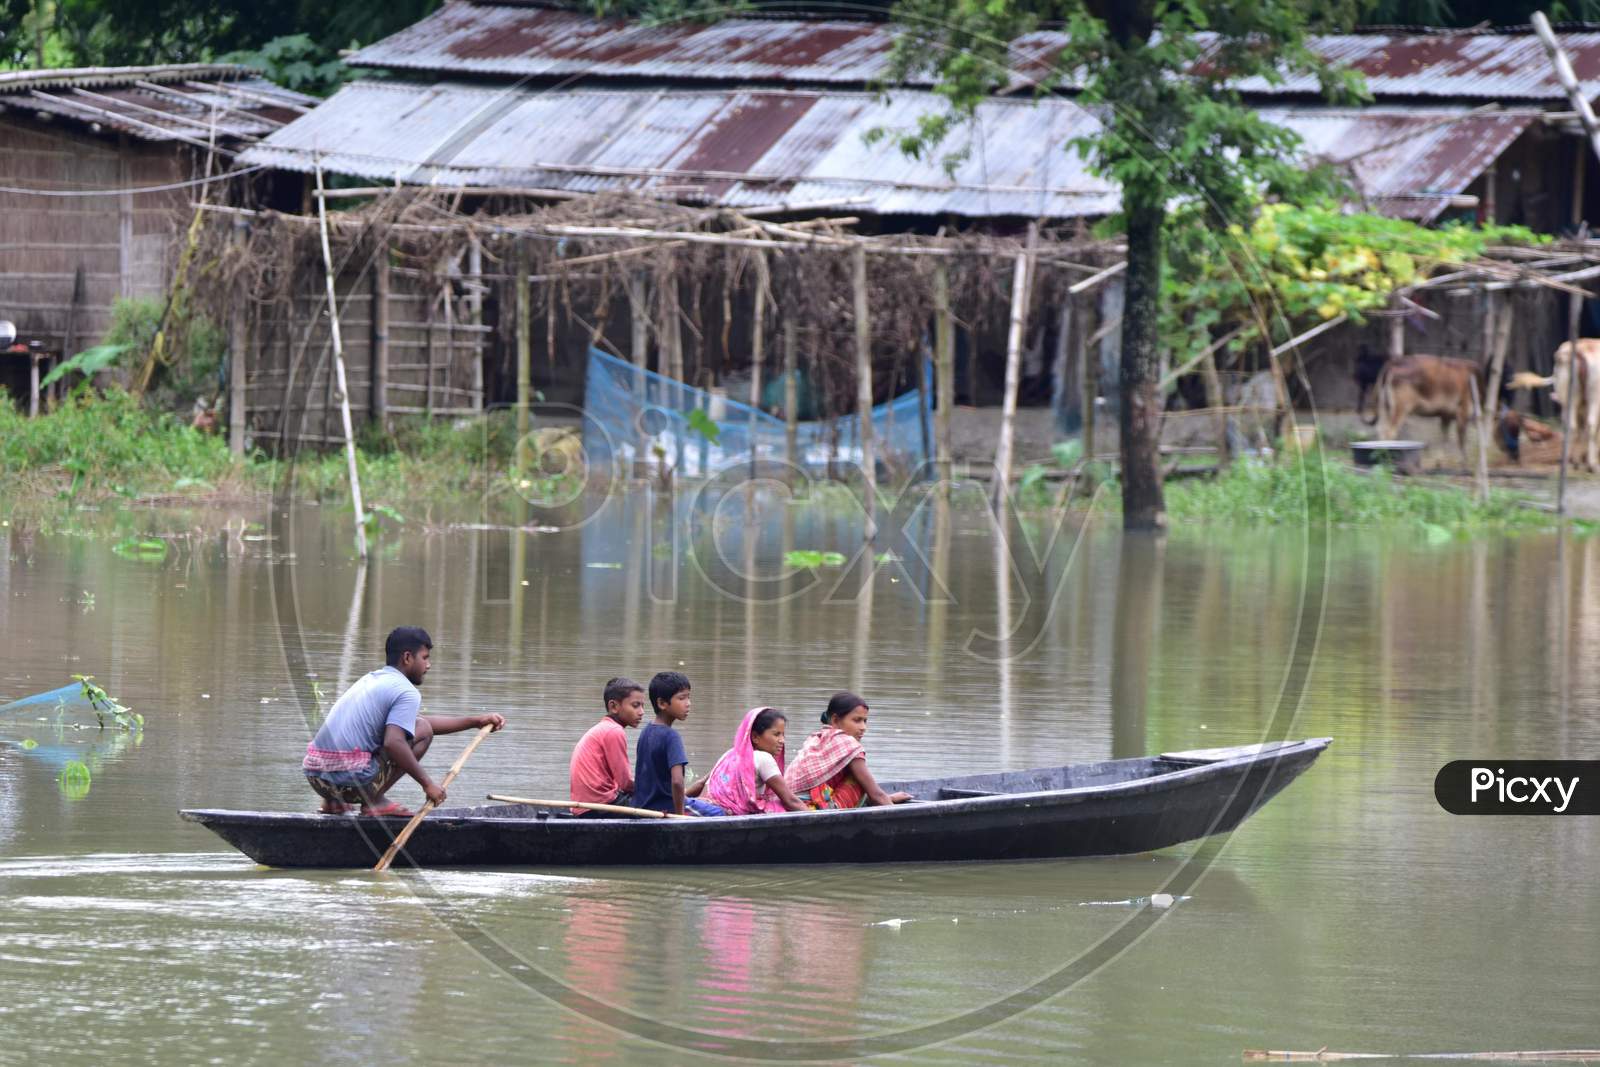 People Move On A Boat Over Floodwaters Following Heavy Rainfall At Bhurbandha Village In Nagaon District Of Assam On June 27,2020.